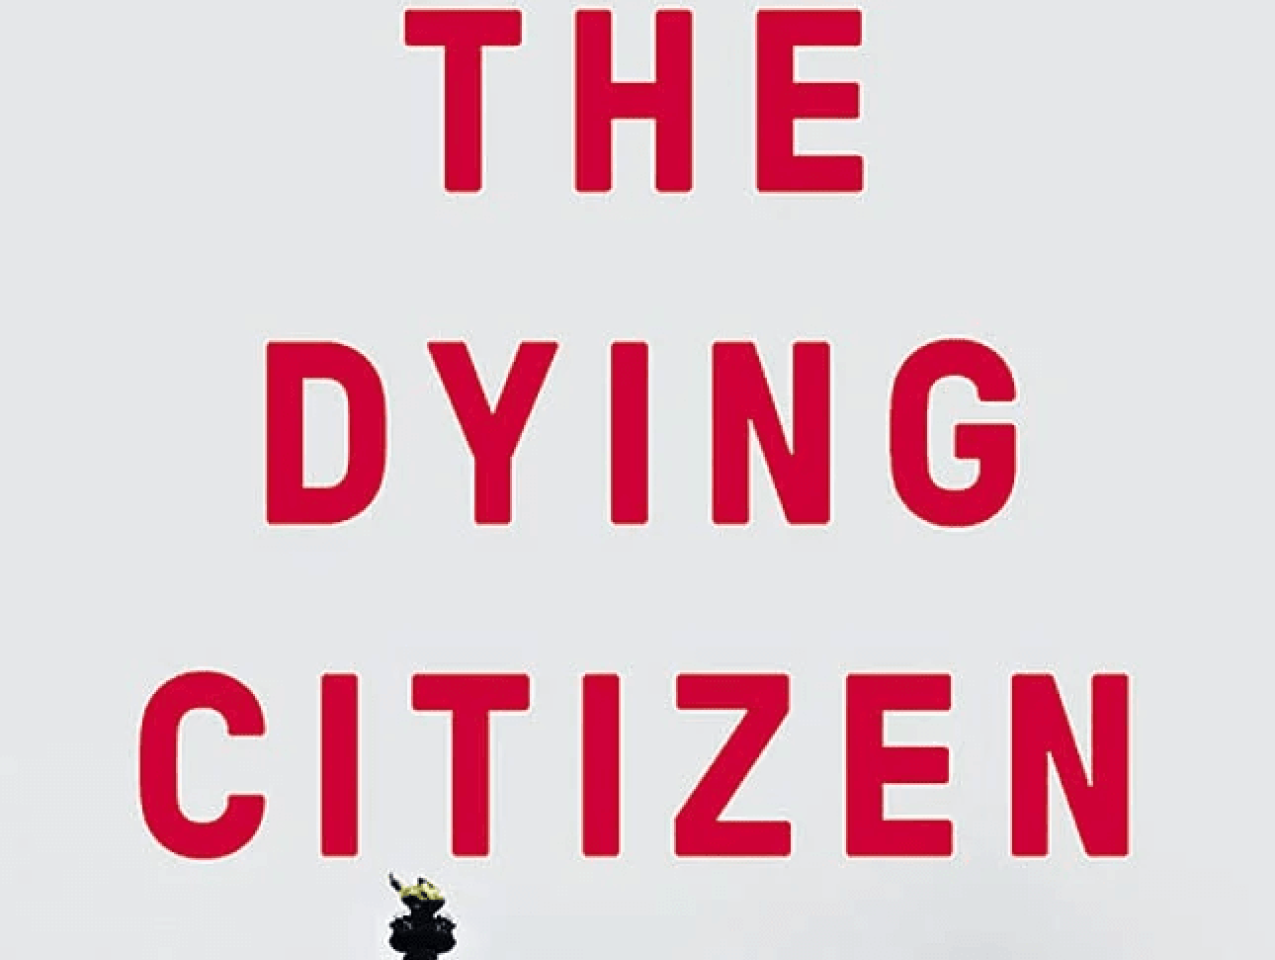 The dying citizen